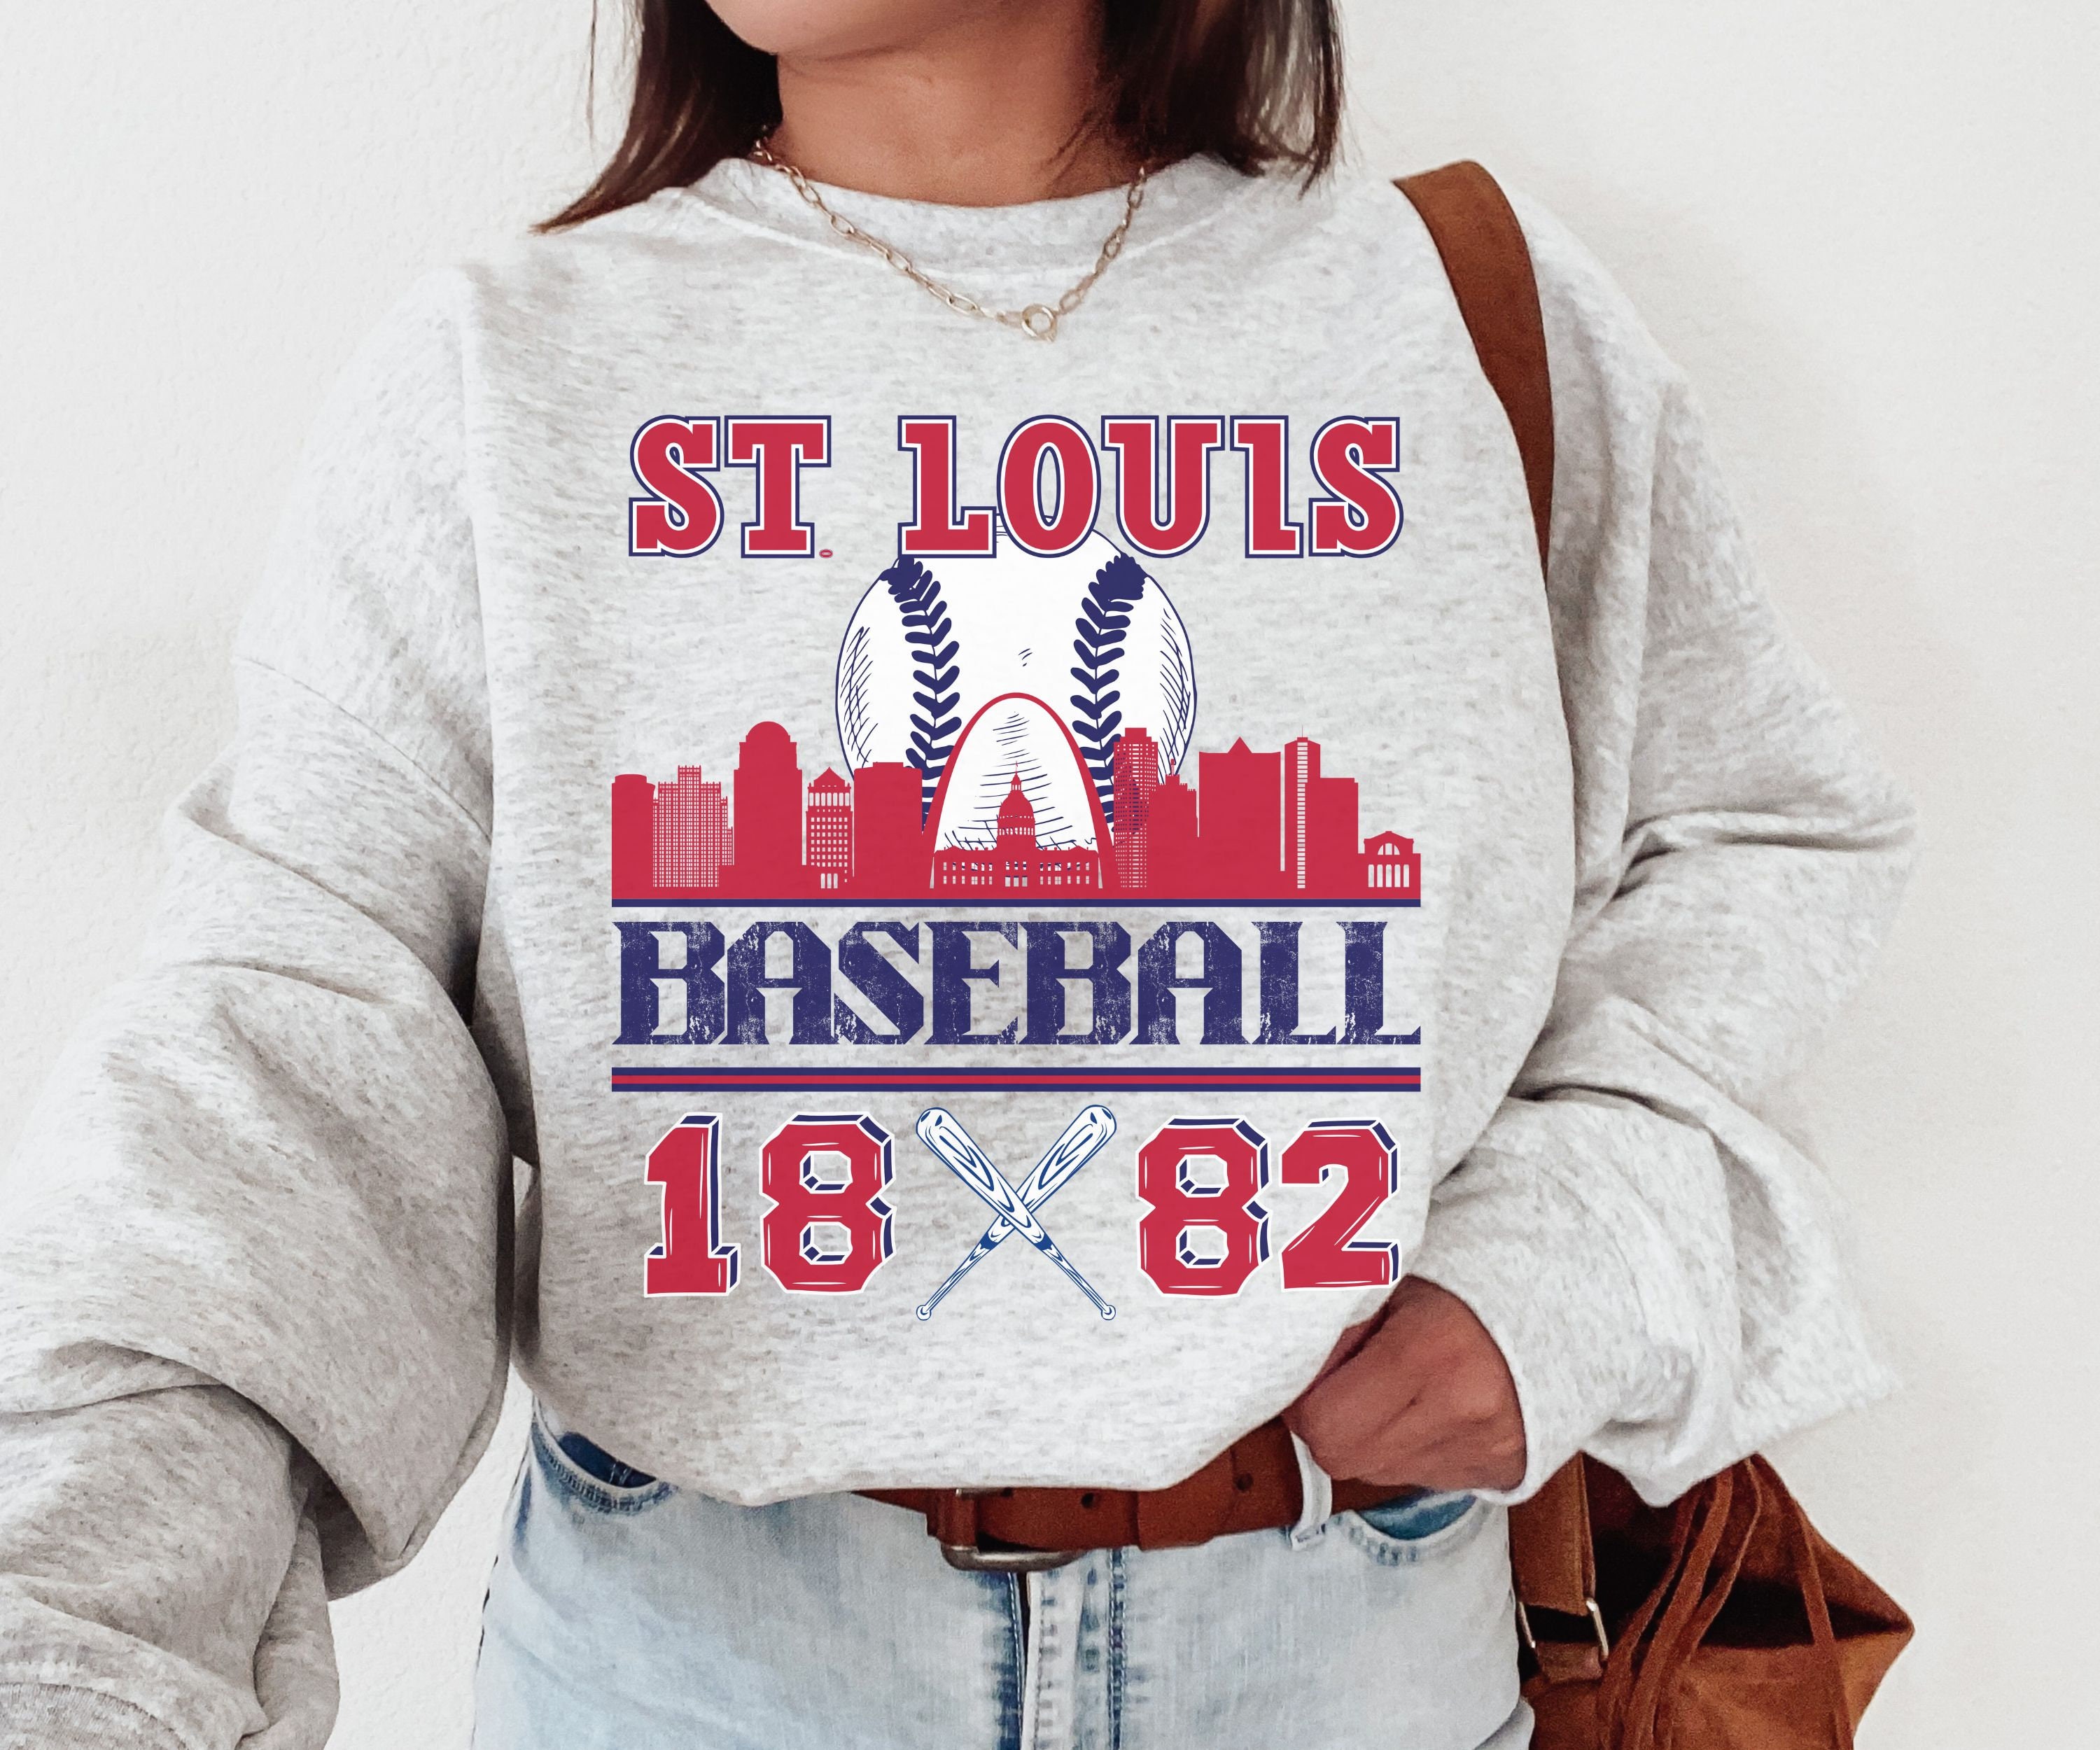 St. Louis Cardinals Baseball Team Signatures T-Shirt, Tshirt, Hoodie,  Sweatshirt, Long Sleeve, Youth, funny shirts, gift shirts, Graphic Tee »  Cool Gifts for You - Mfamilygift